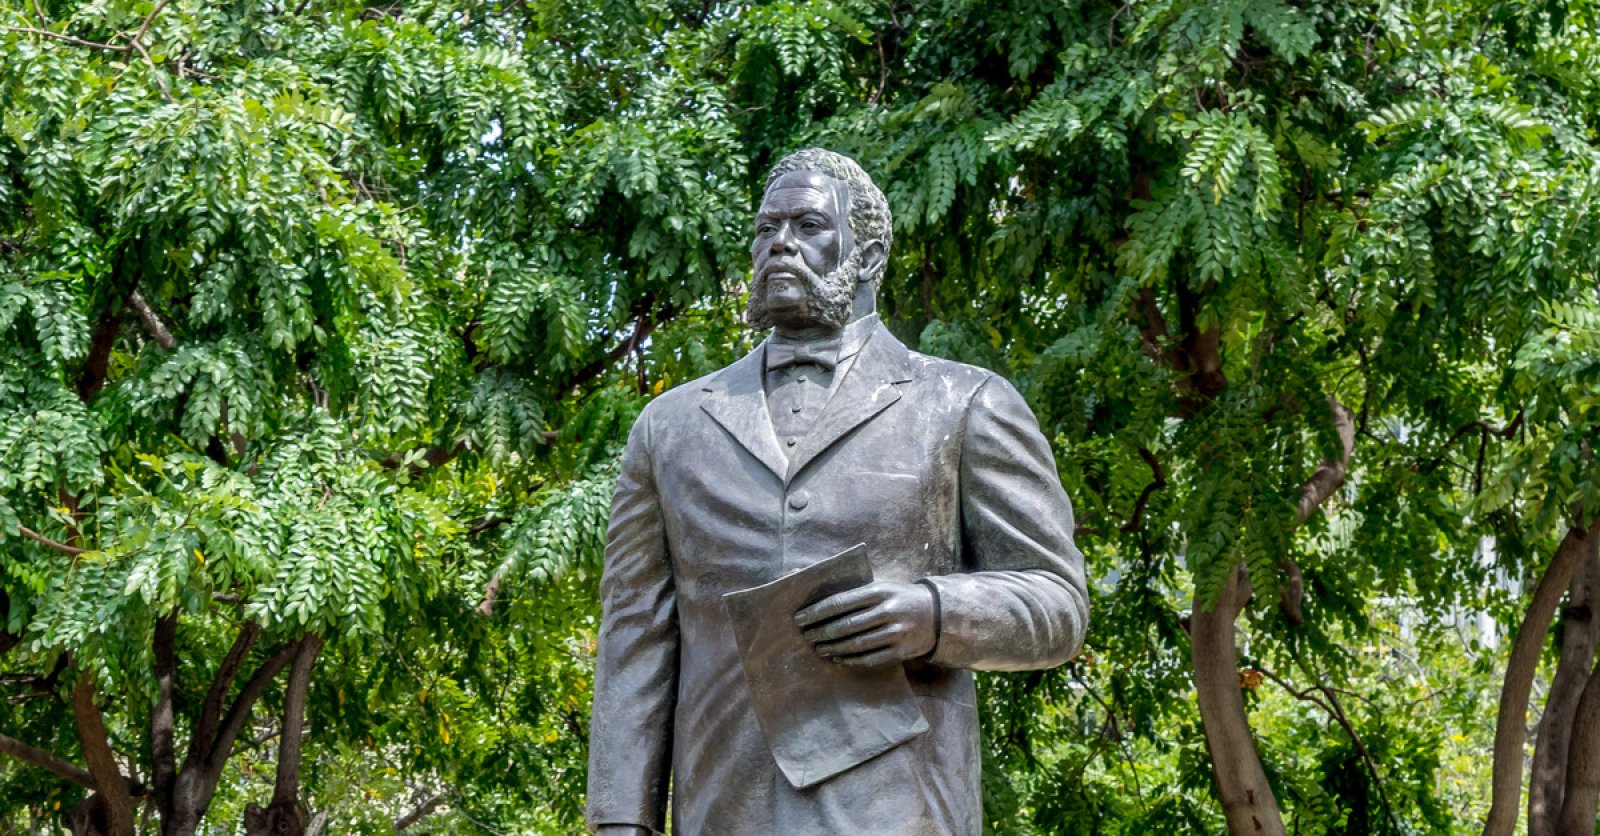 King Kalakaua lived from 1836 until 1891